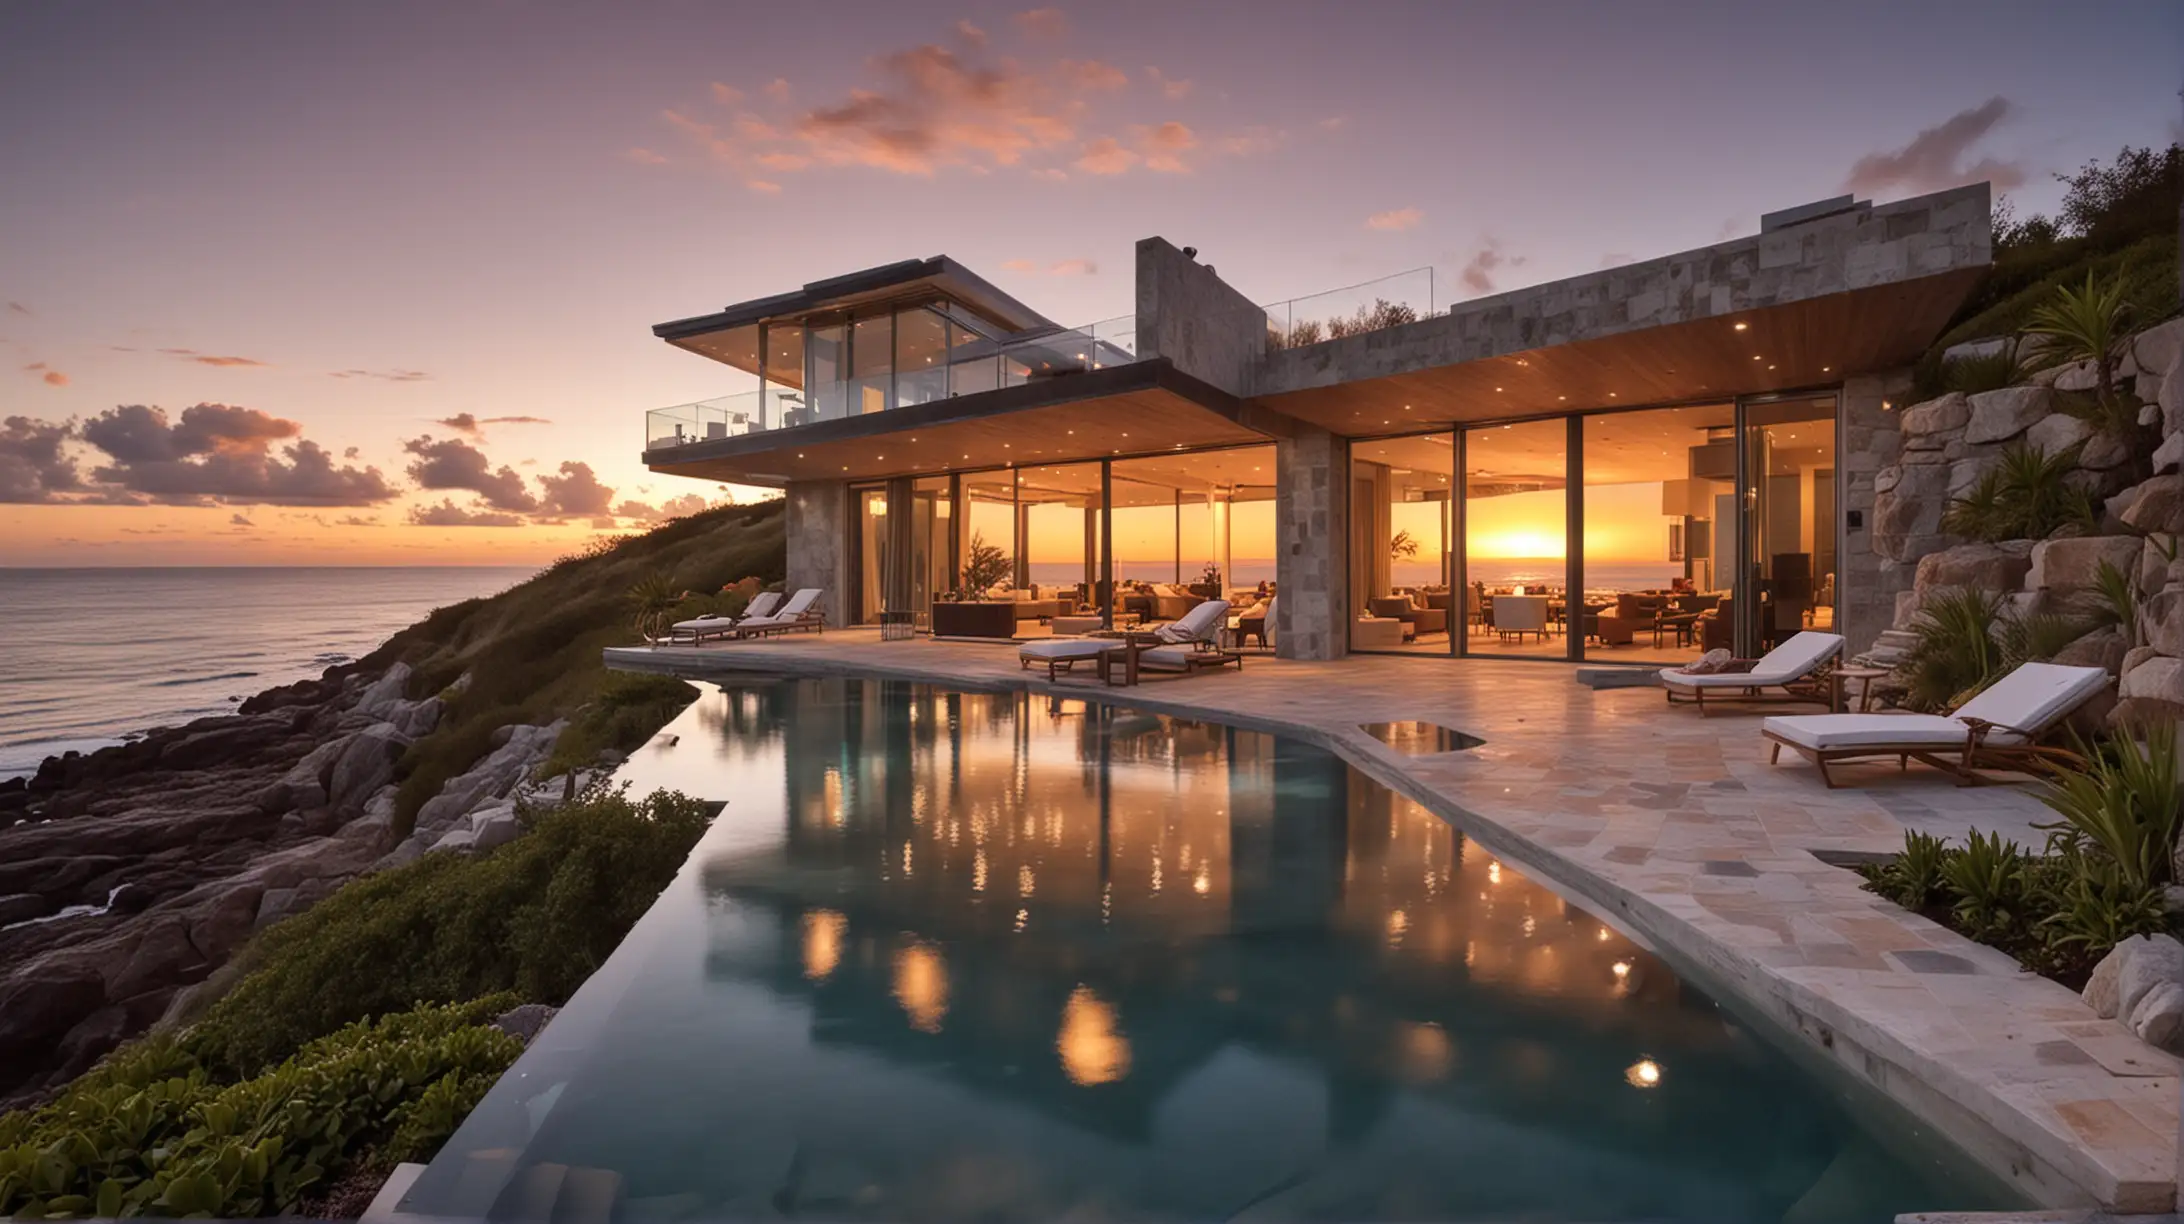 Contemporary Oceanfront Vacation Home with Infinity Pool at Sunset